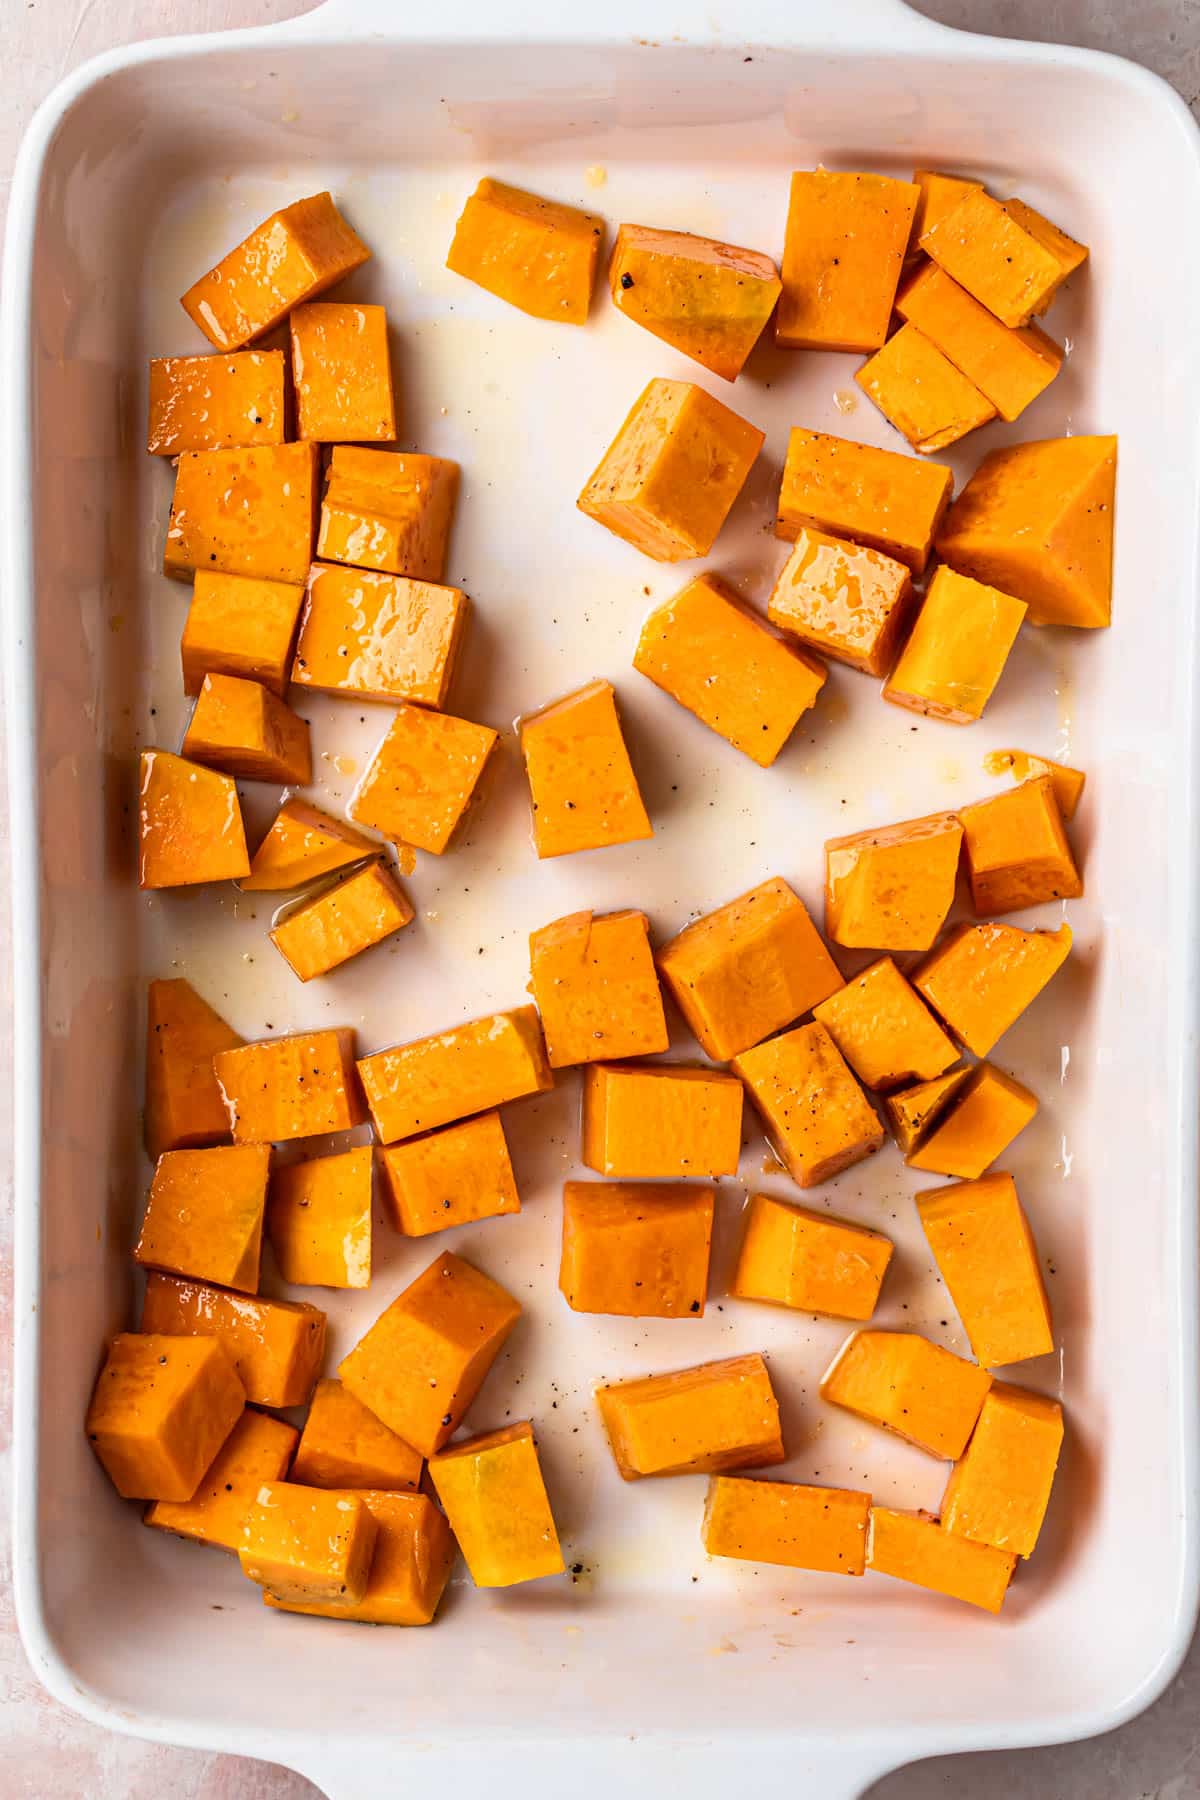 Diced pumpkin seasoned and coated in olive oil, spread out across the base of a white baking dish.